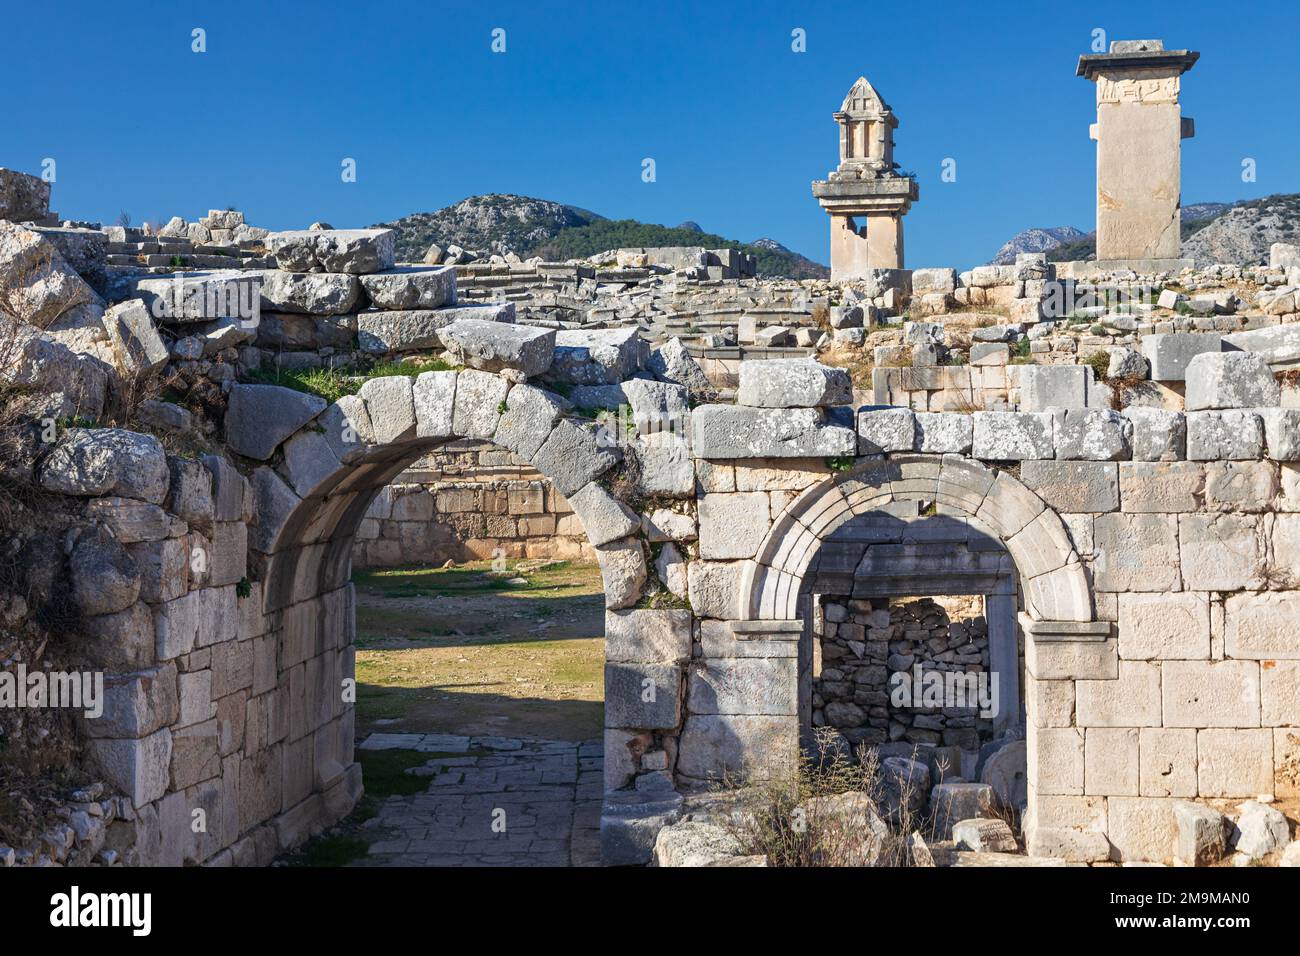 Entrance gate to theatre of Xanthos ancient city - part of Lycian way. Tomb monument of king Kybernis ( Harpy Tomb), Pillar Tomb on background. Stock Photo